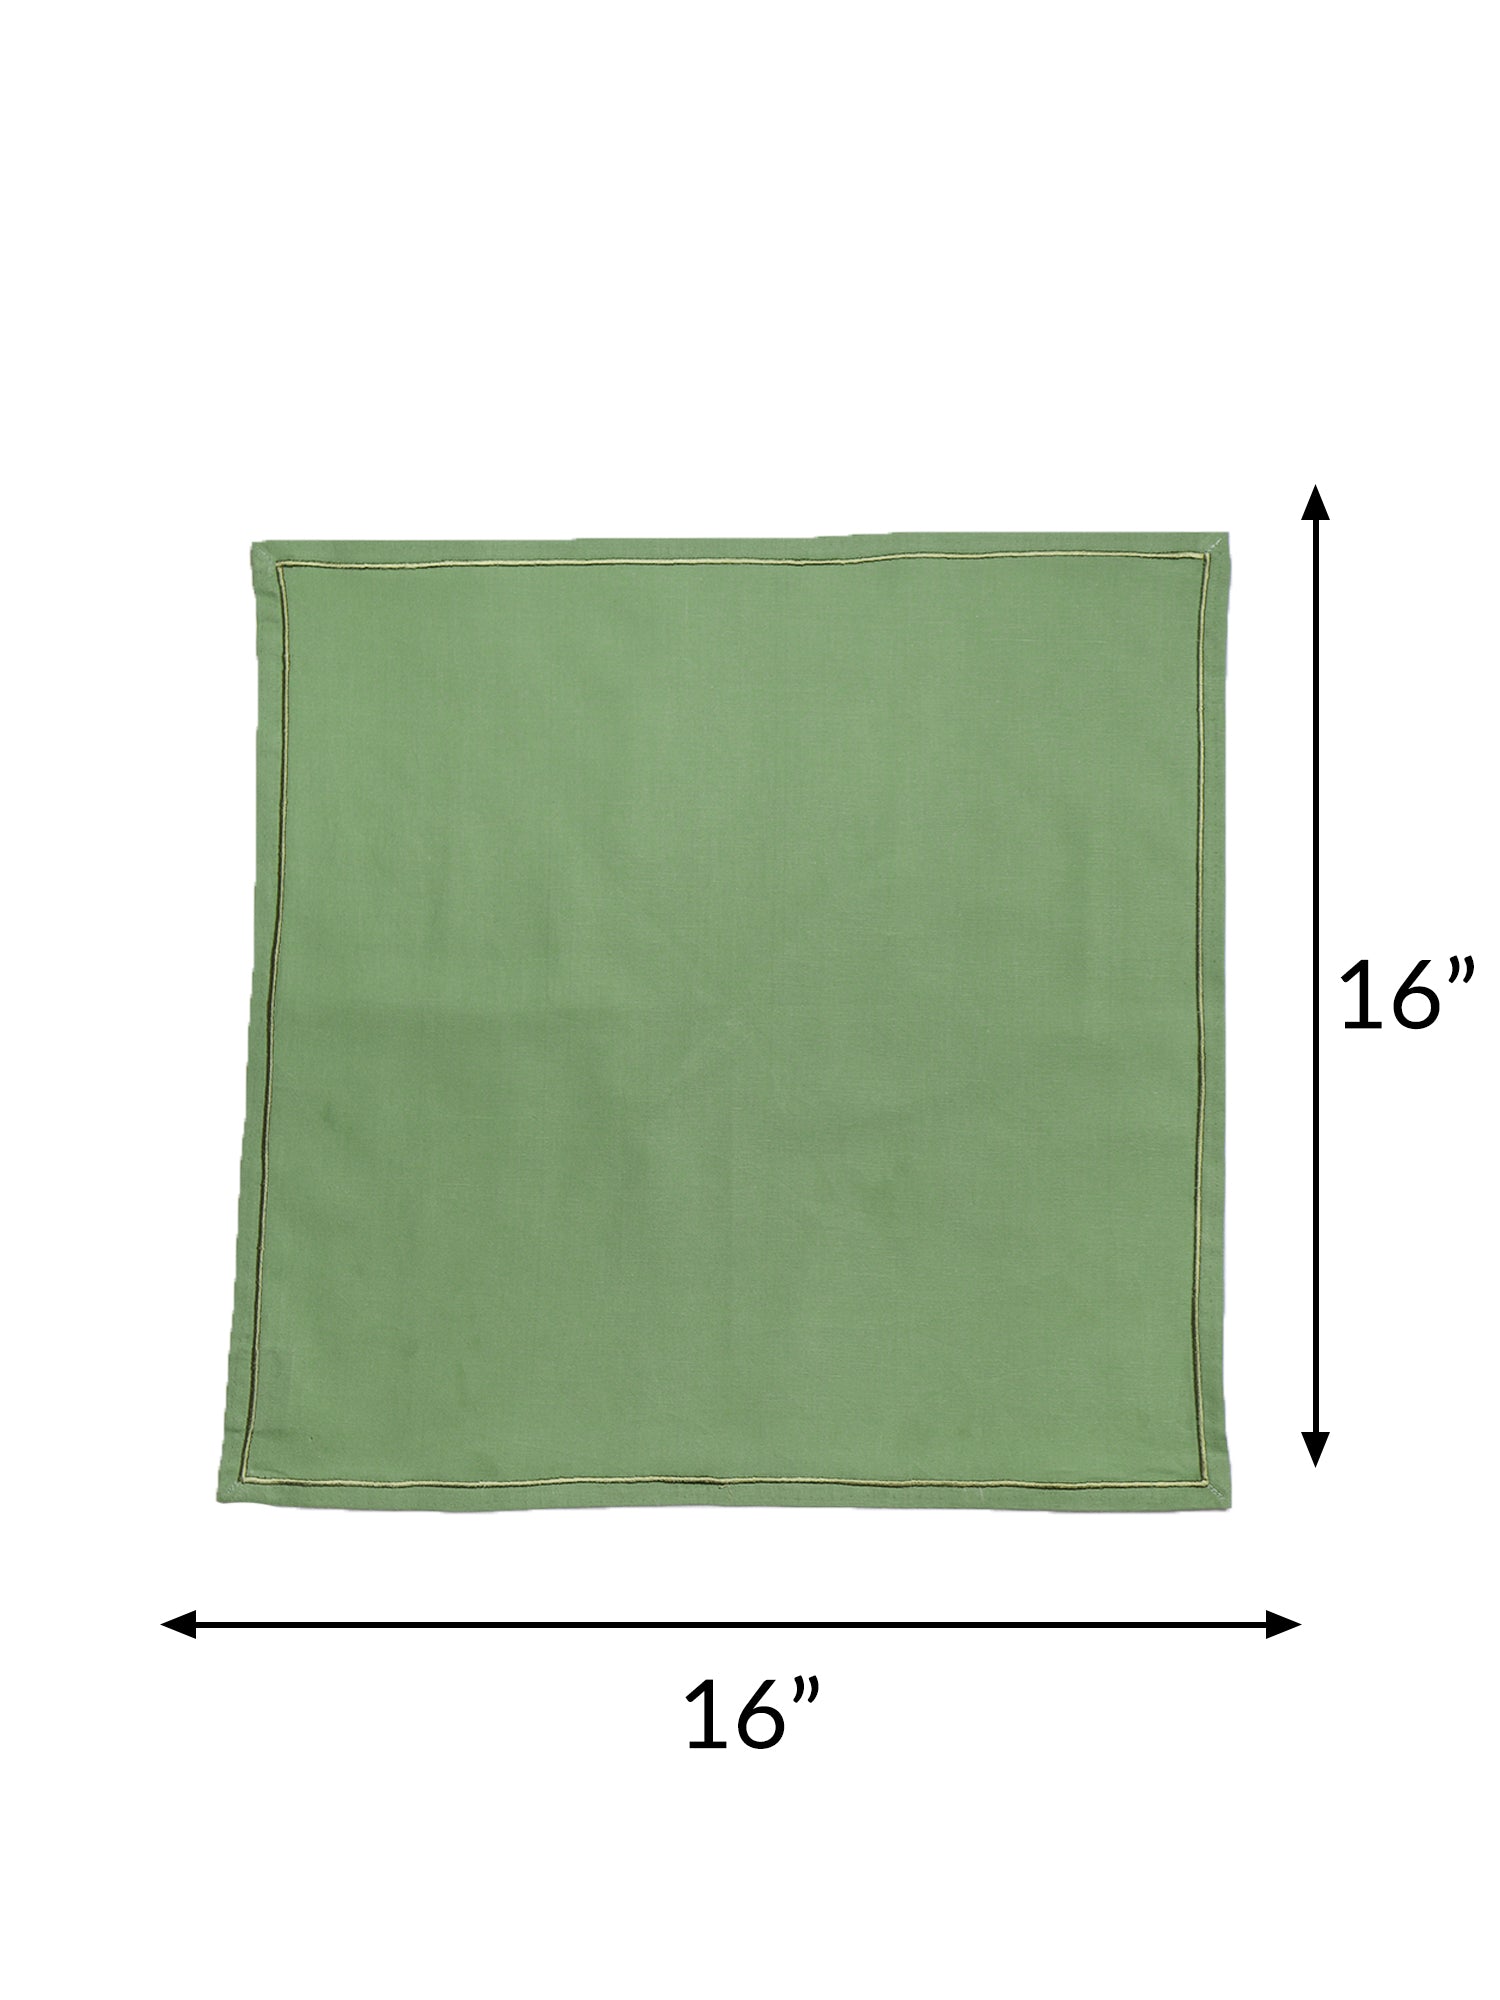 embroidered set of 6 dinner napkins in olive green color - 16x16 inch